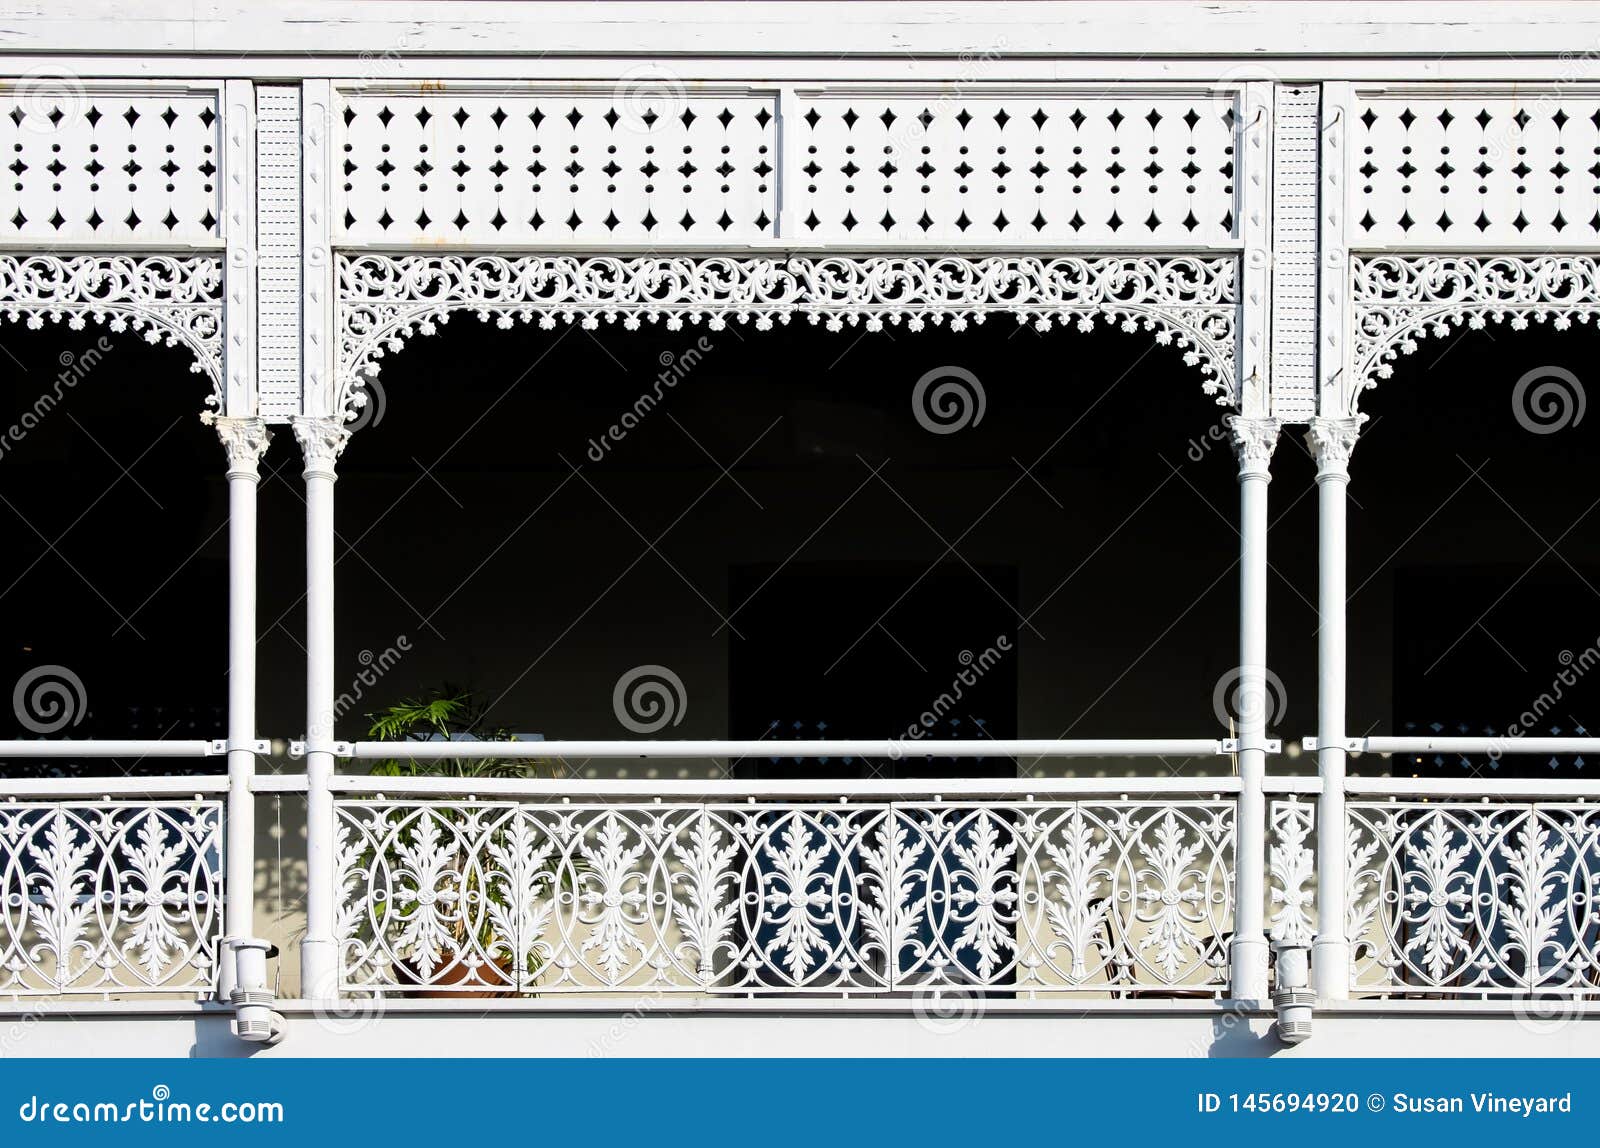 victorian decorative wrought iron balcony with a plant on it but mostly darkness behind the white painted ornate railings -